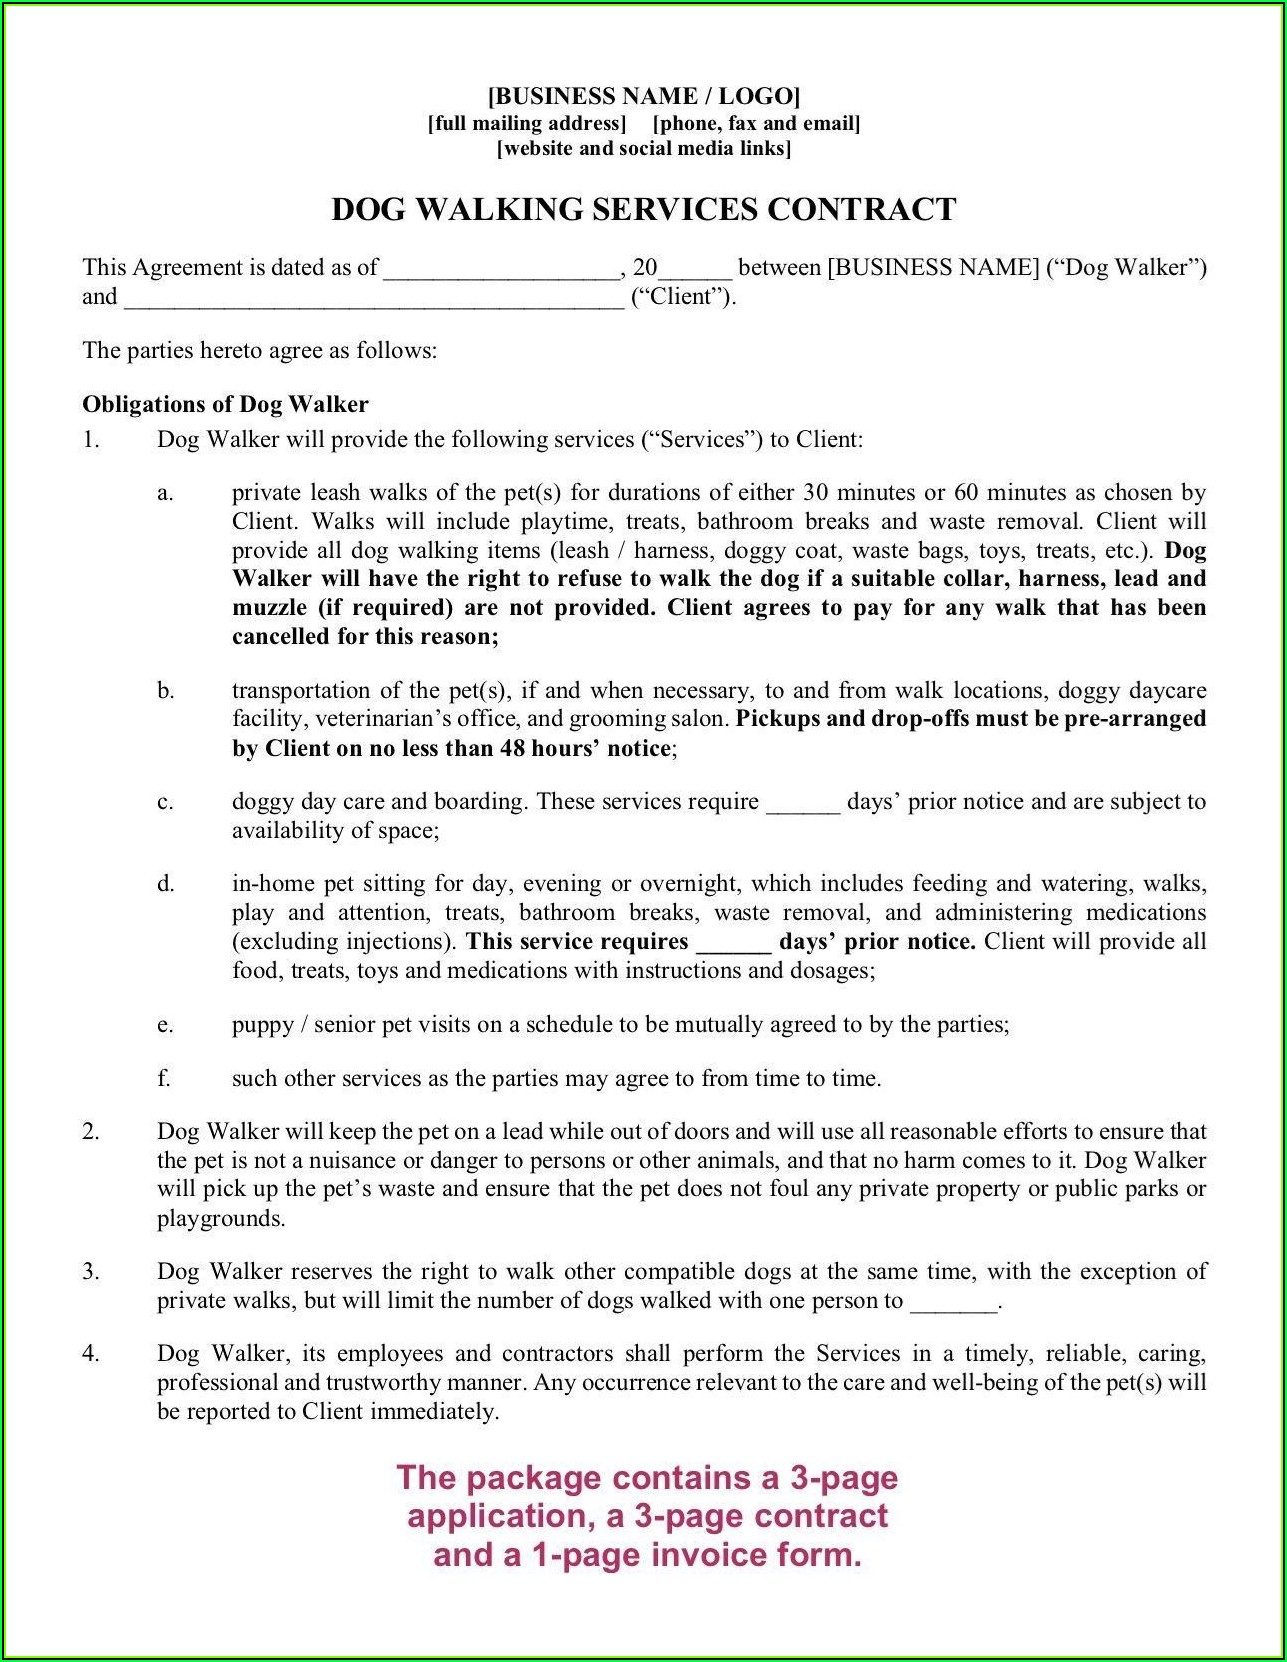 dog-walking-agreement-template-template-2-resume-examples-wjydeo6vkb